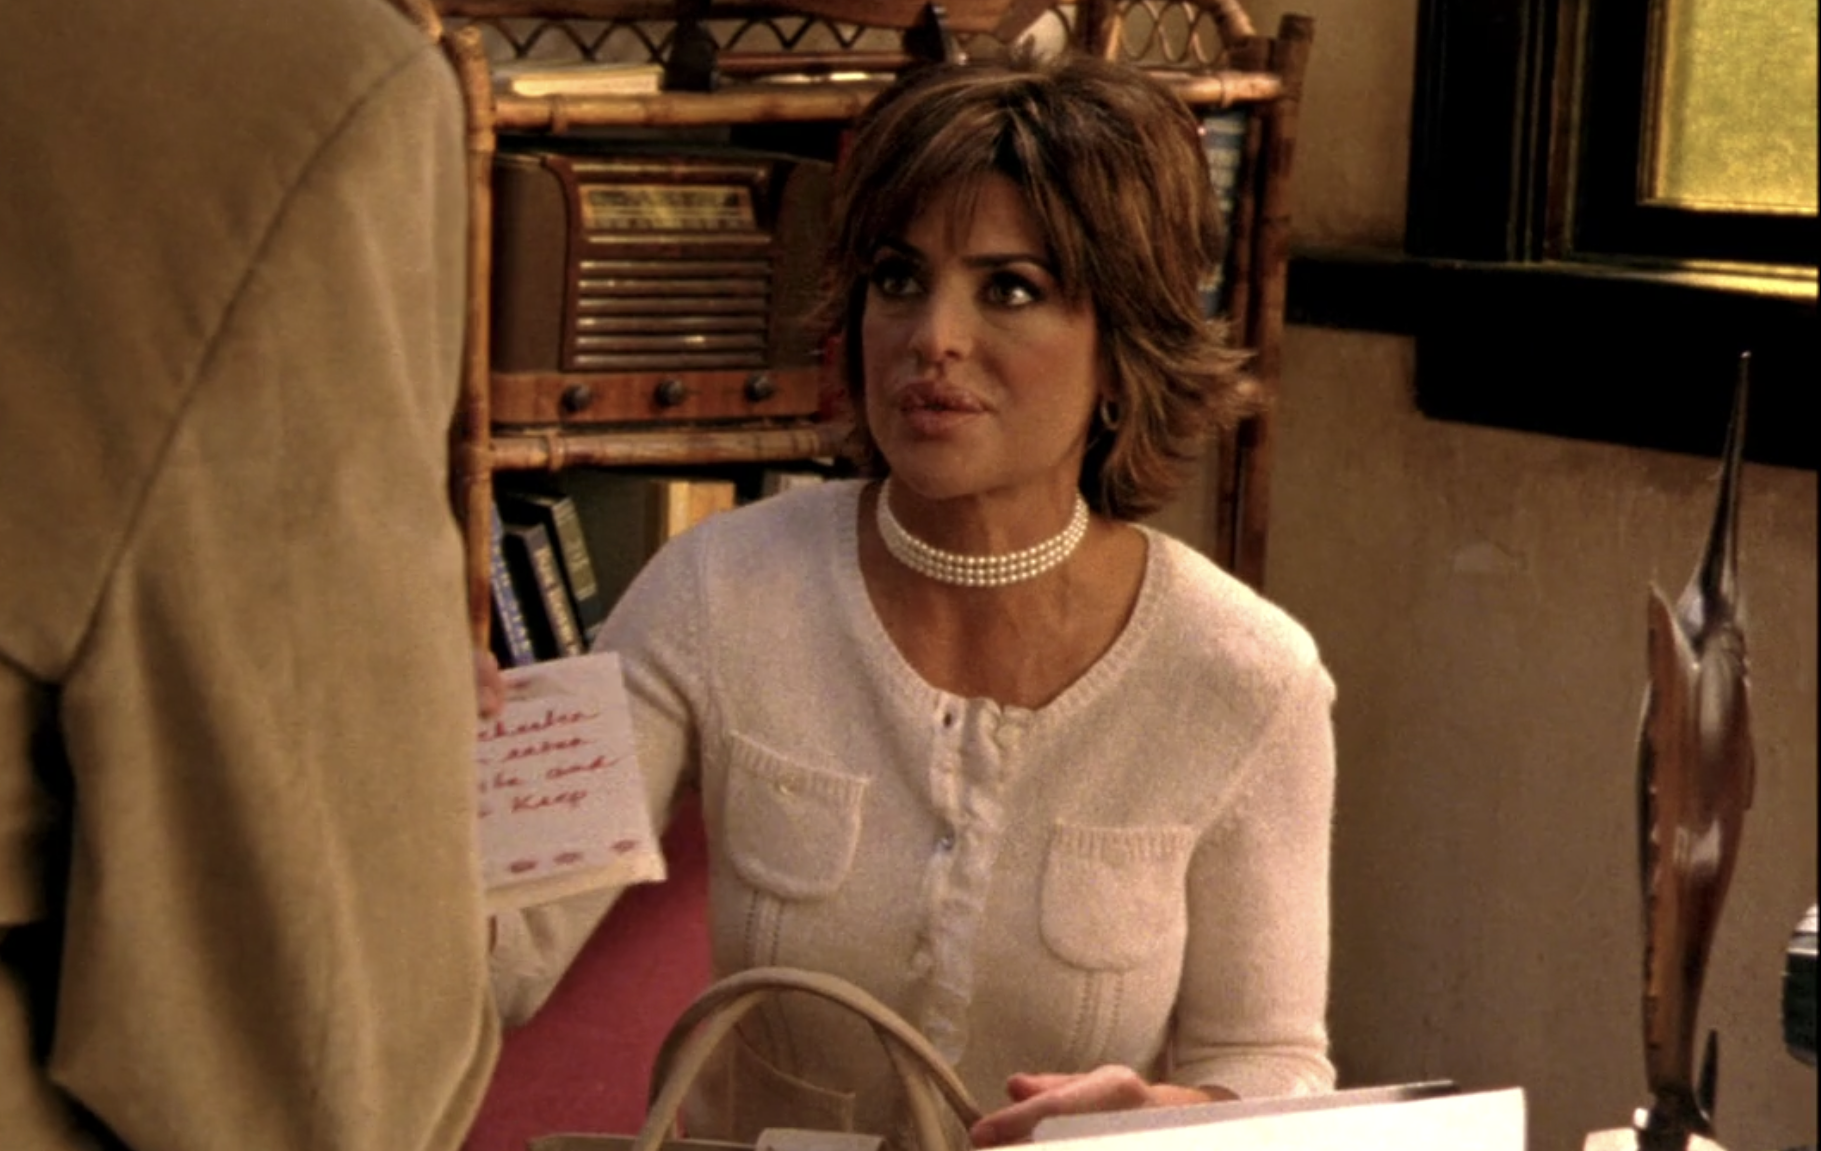 Screenshot from Veronica Mars season one, episode 10. Lynn is in Keith's office, wearing a white sweater and a choker made of pearls. She's holding up a threatening note to Aaron written in red marker.